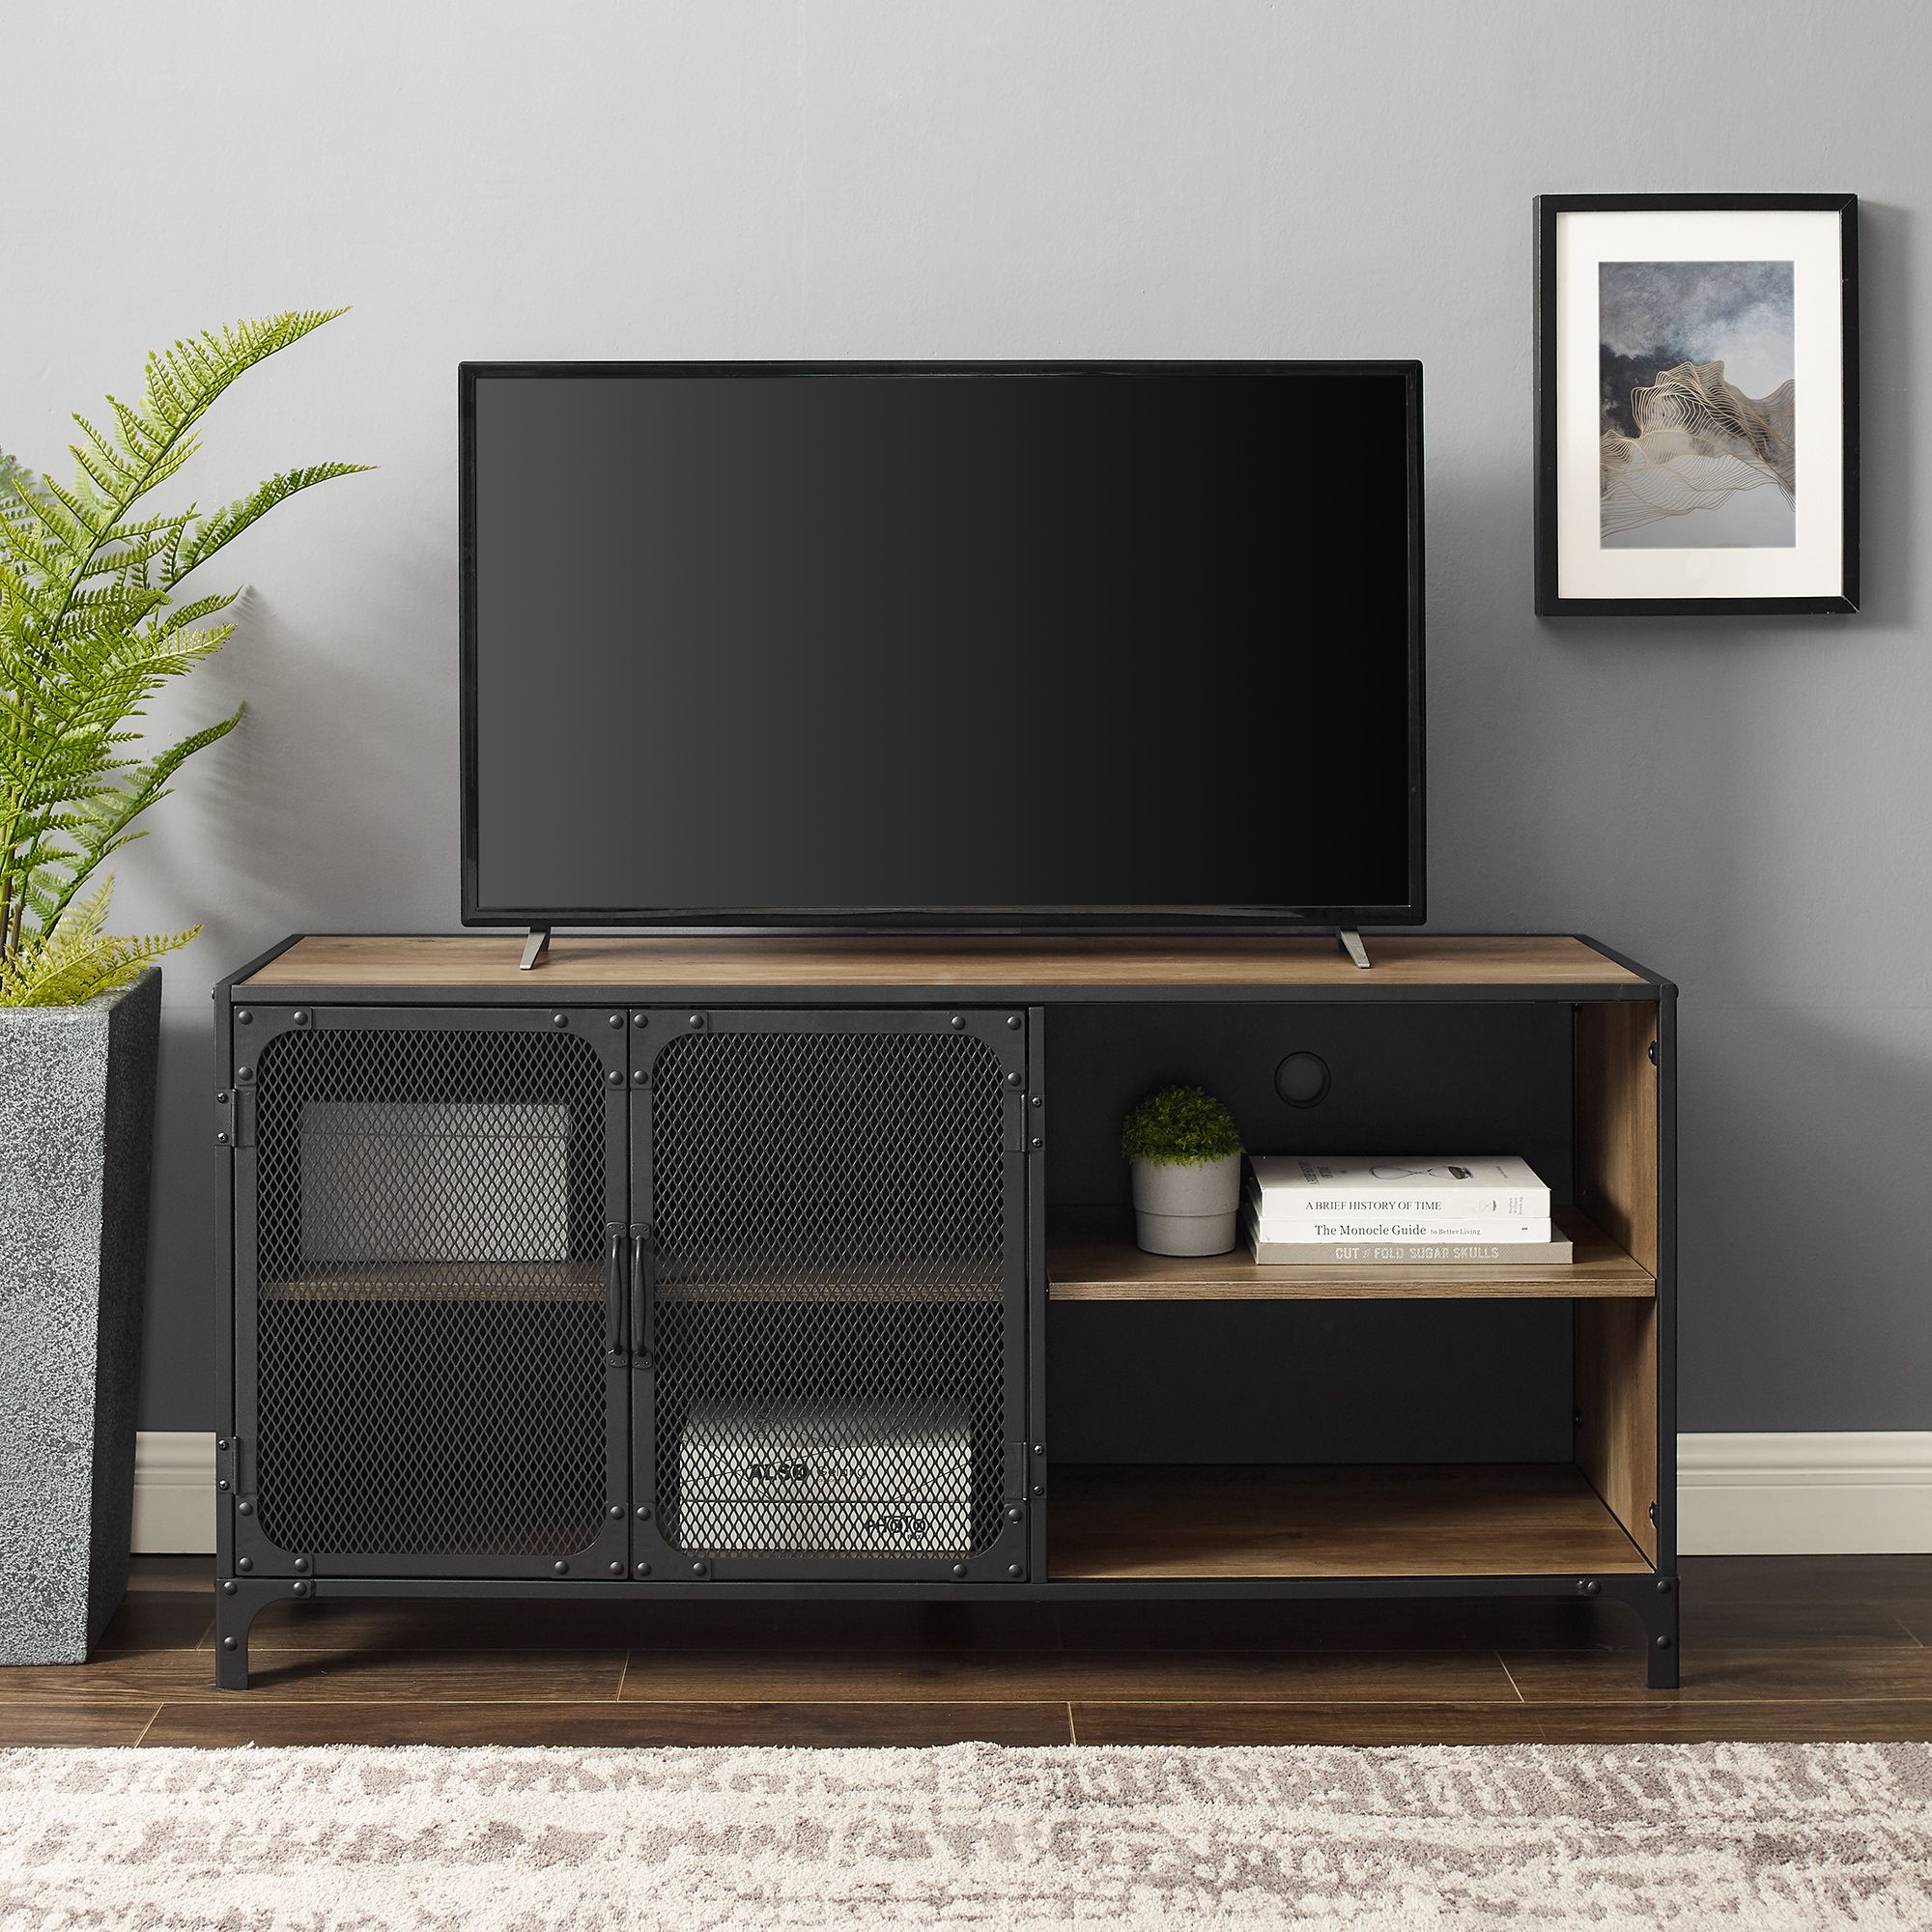 Manor Park Industrial Tv Stand For Tvs Up To 58 With Kamari Tv Stands For Tvs Up To 58" (View 2 of 15)